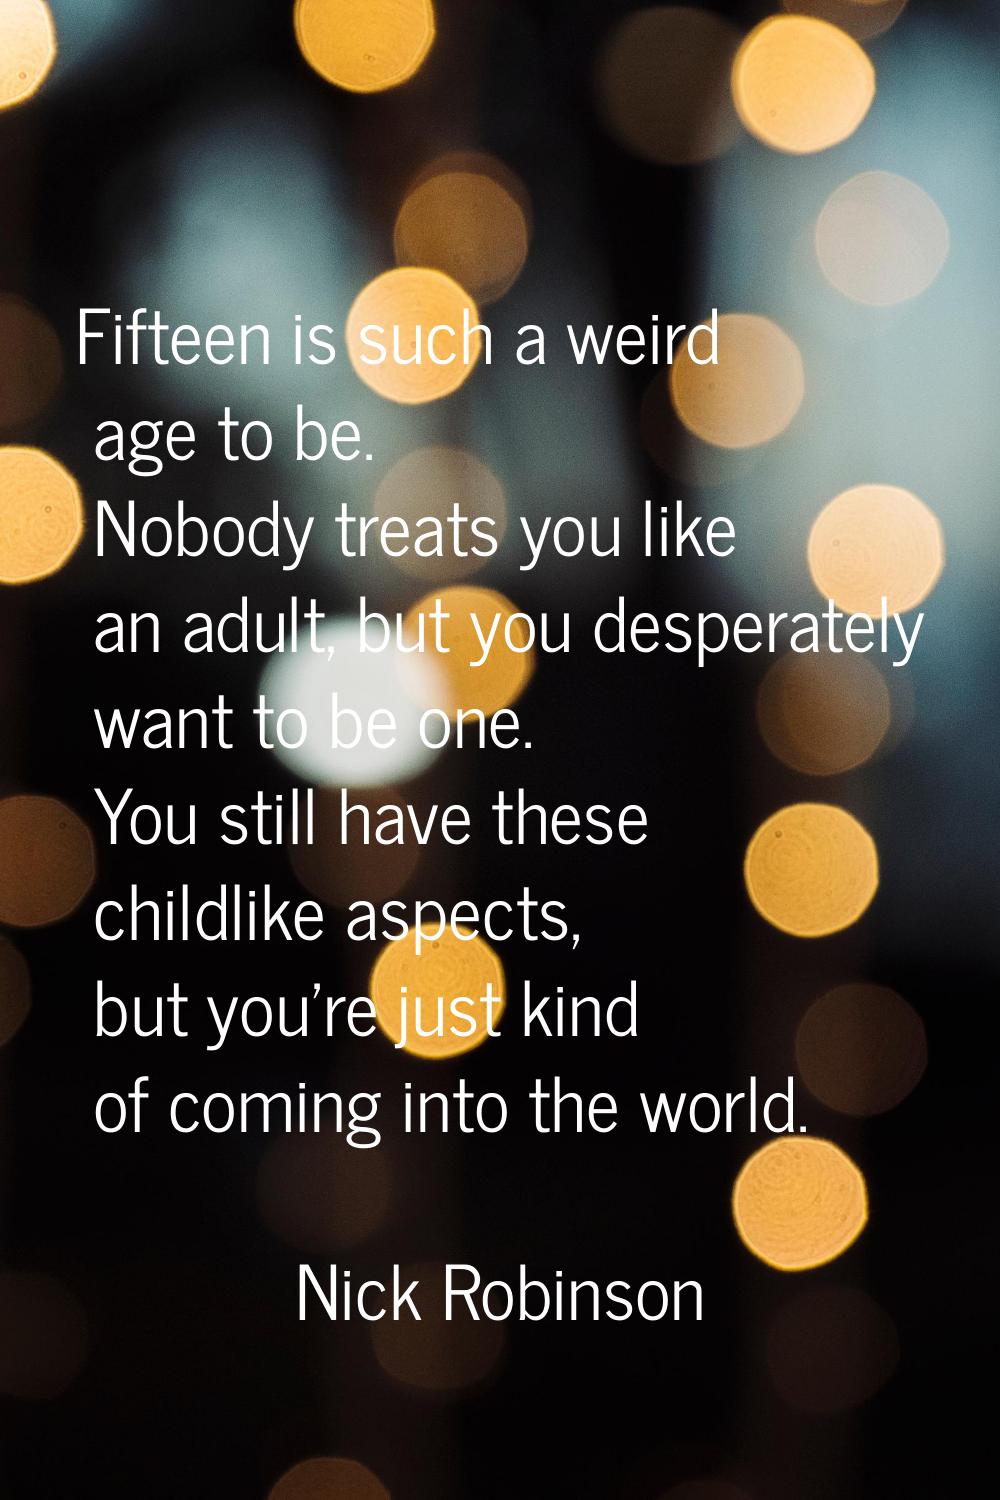 Fifteen is such a weird age to be. Nobody treats you like an adult, but you desperately want to be 